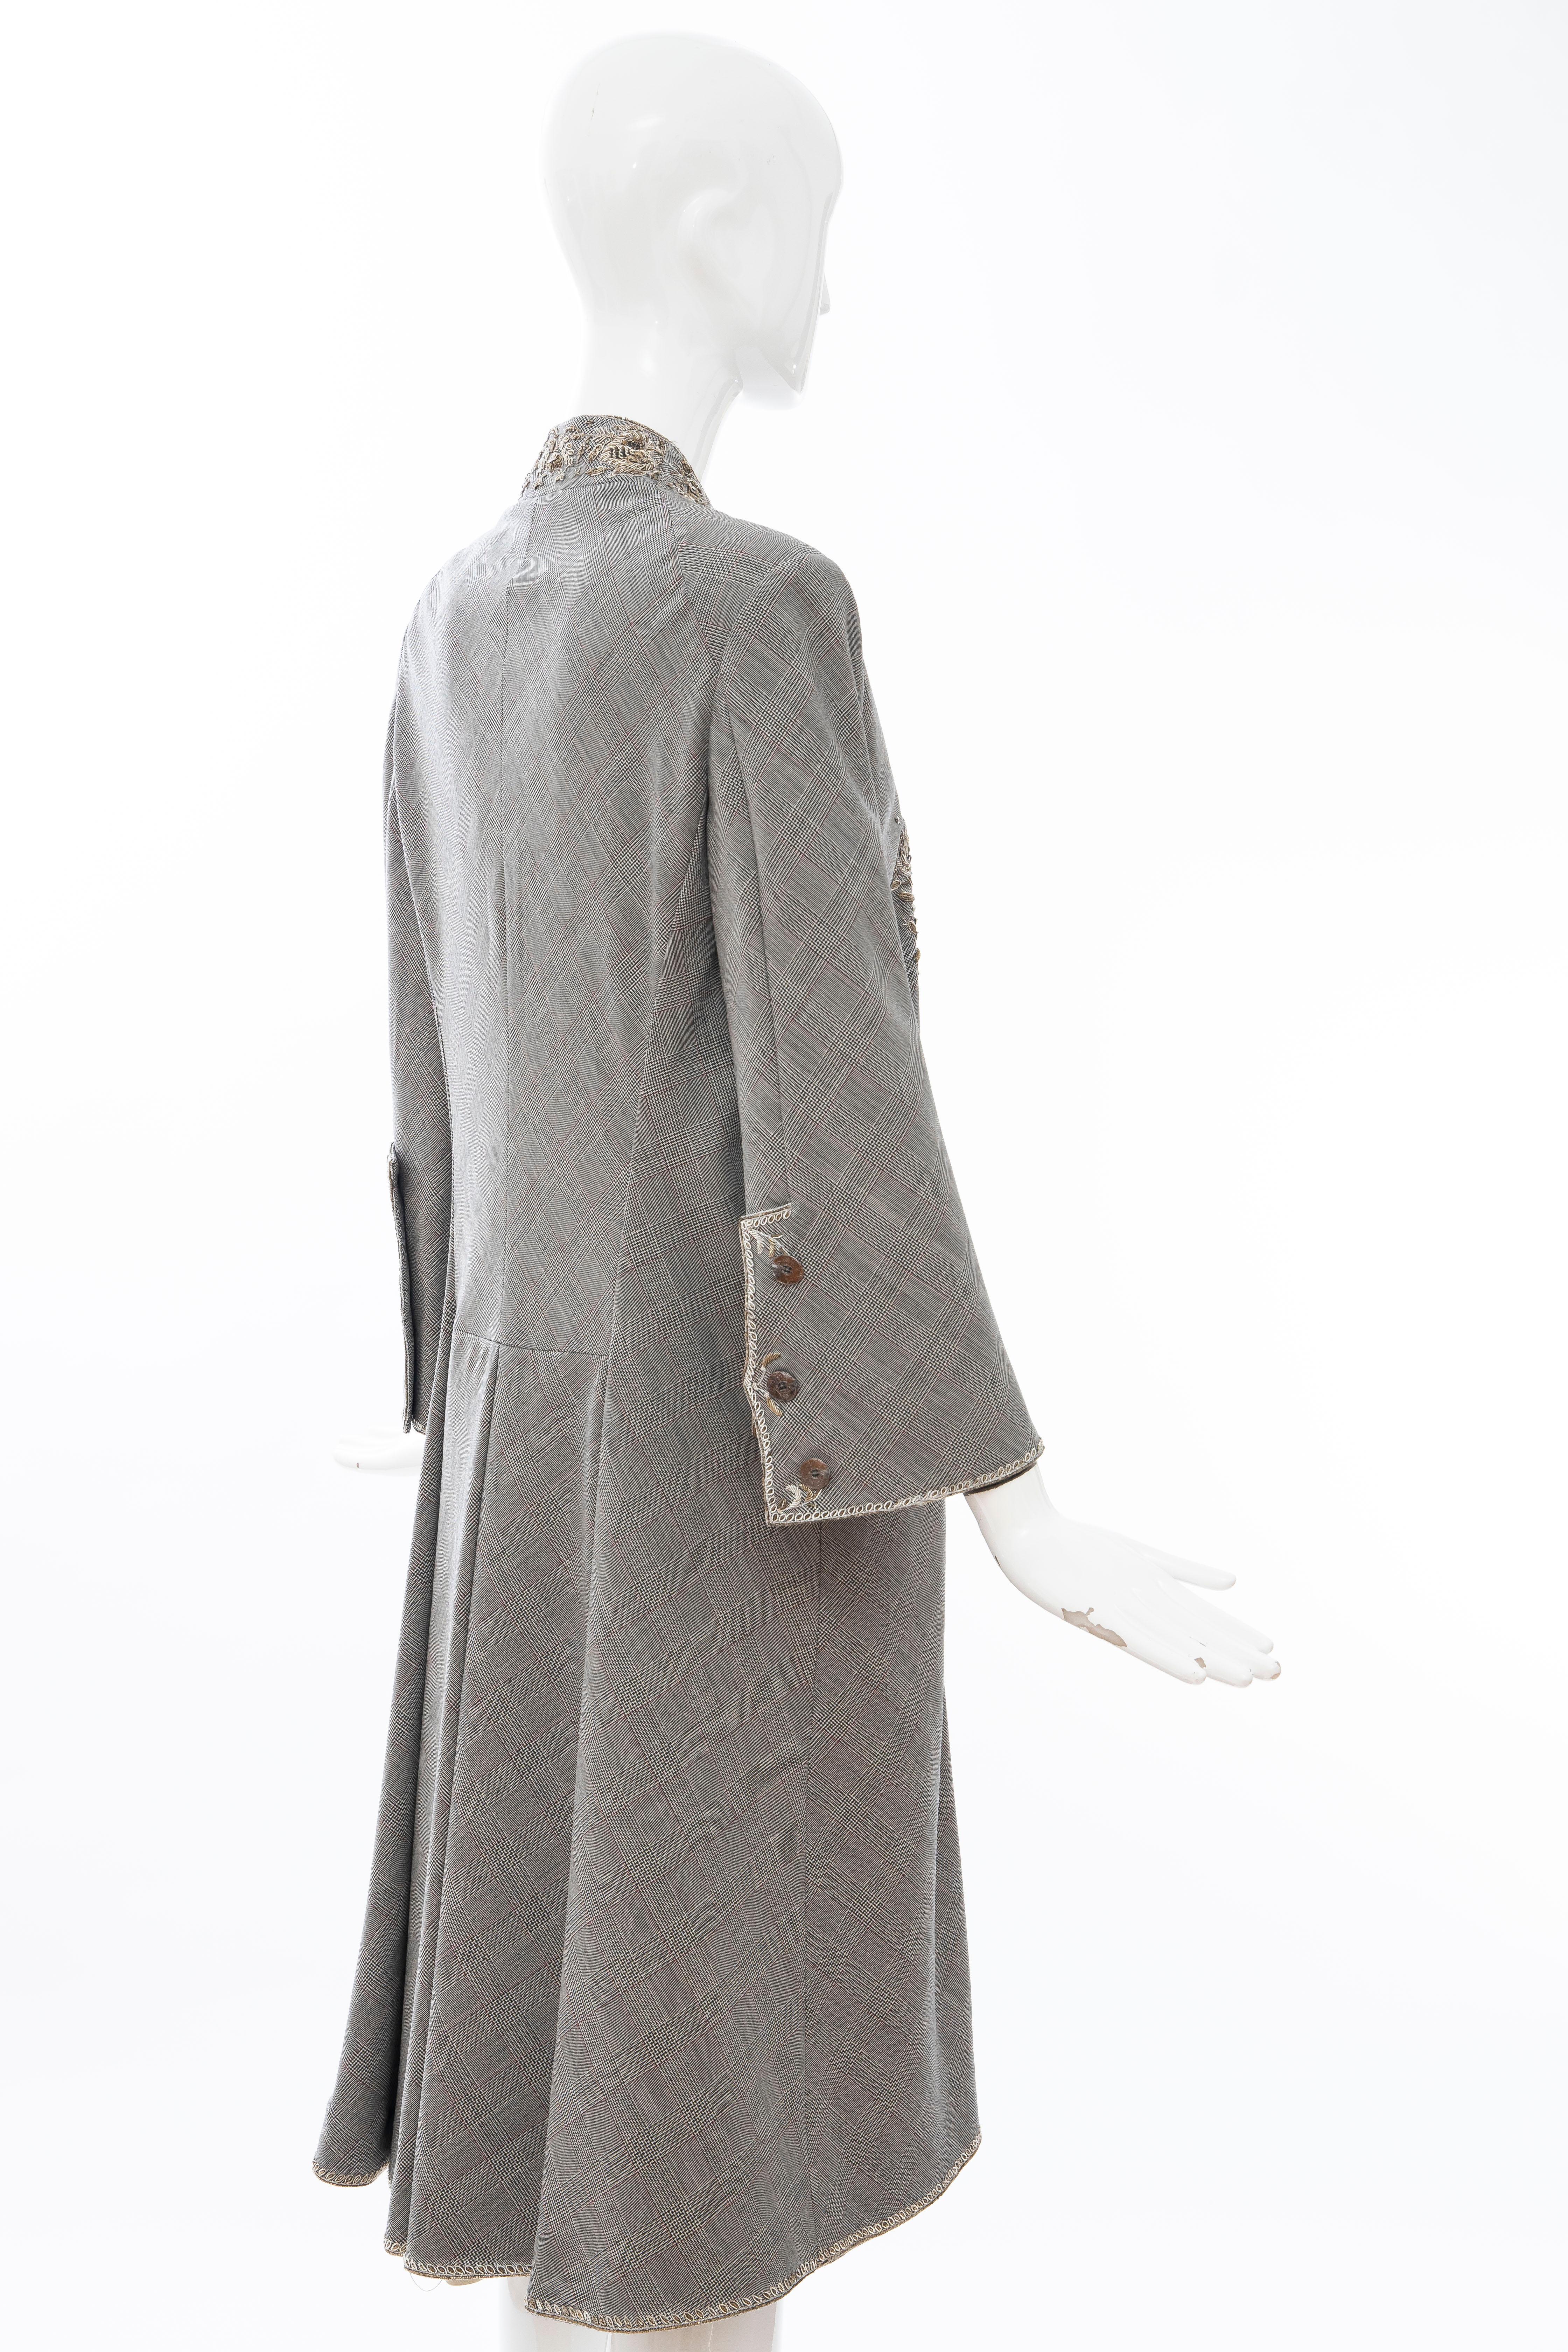 Alexander McQueen Wessex Glen Plaid Bullion Wire Embroidered Coat, Spring 2002 For Sale 2